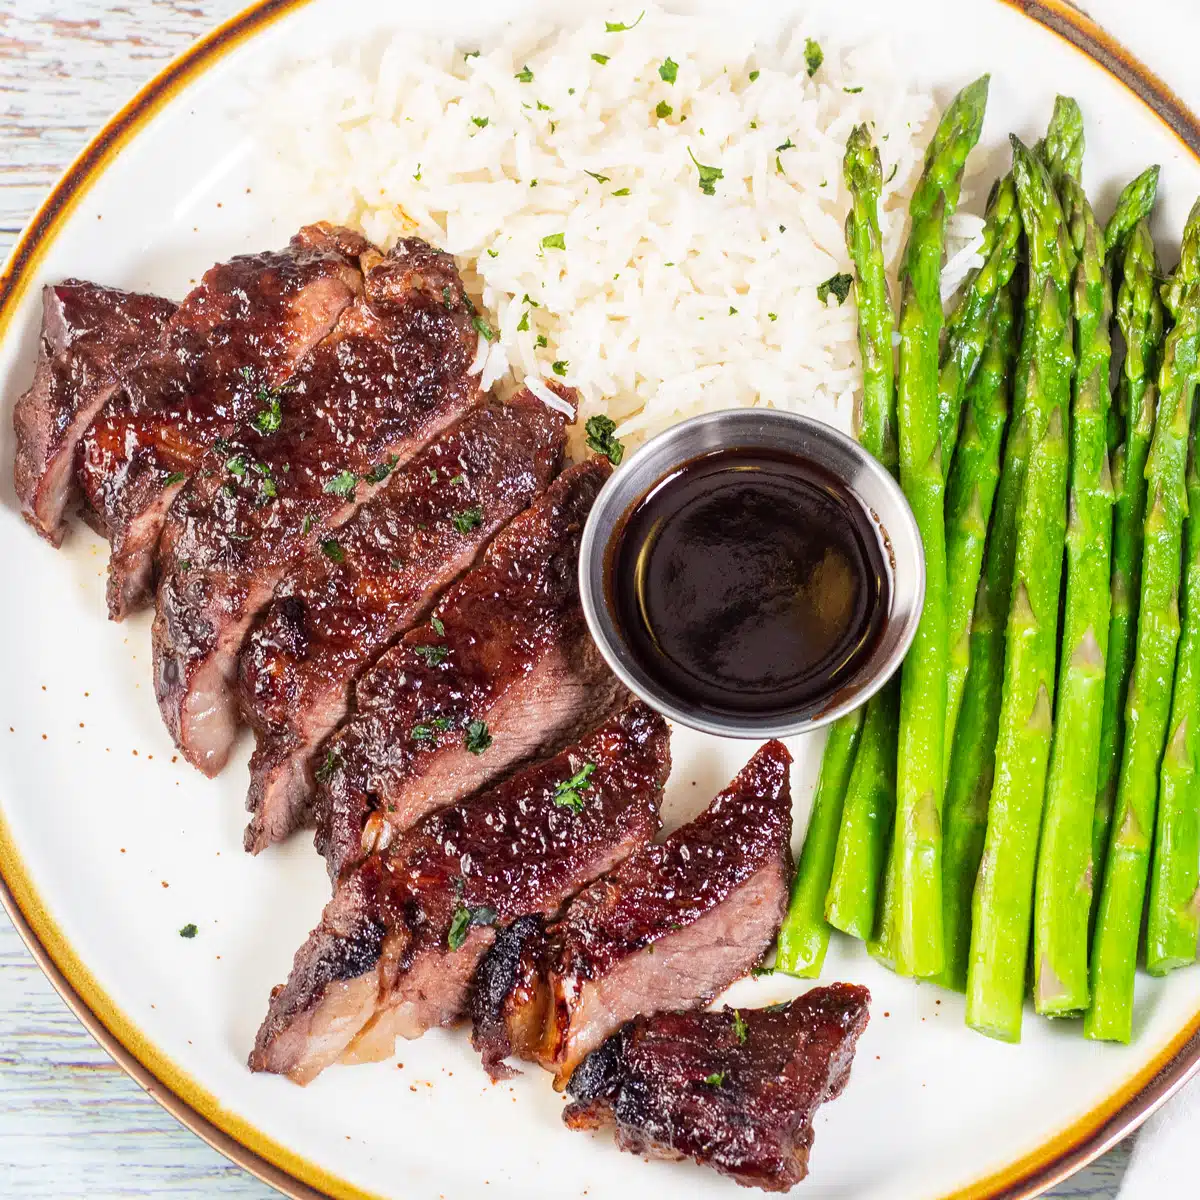 Square image of baked boneless short ribs on a plate with asparagus, rice, and sauce.